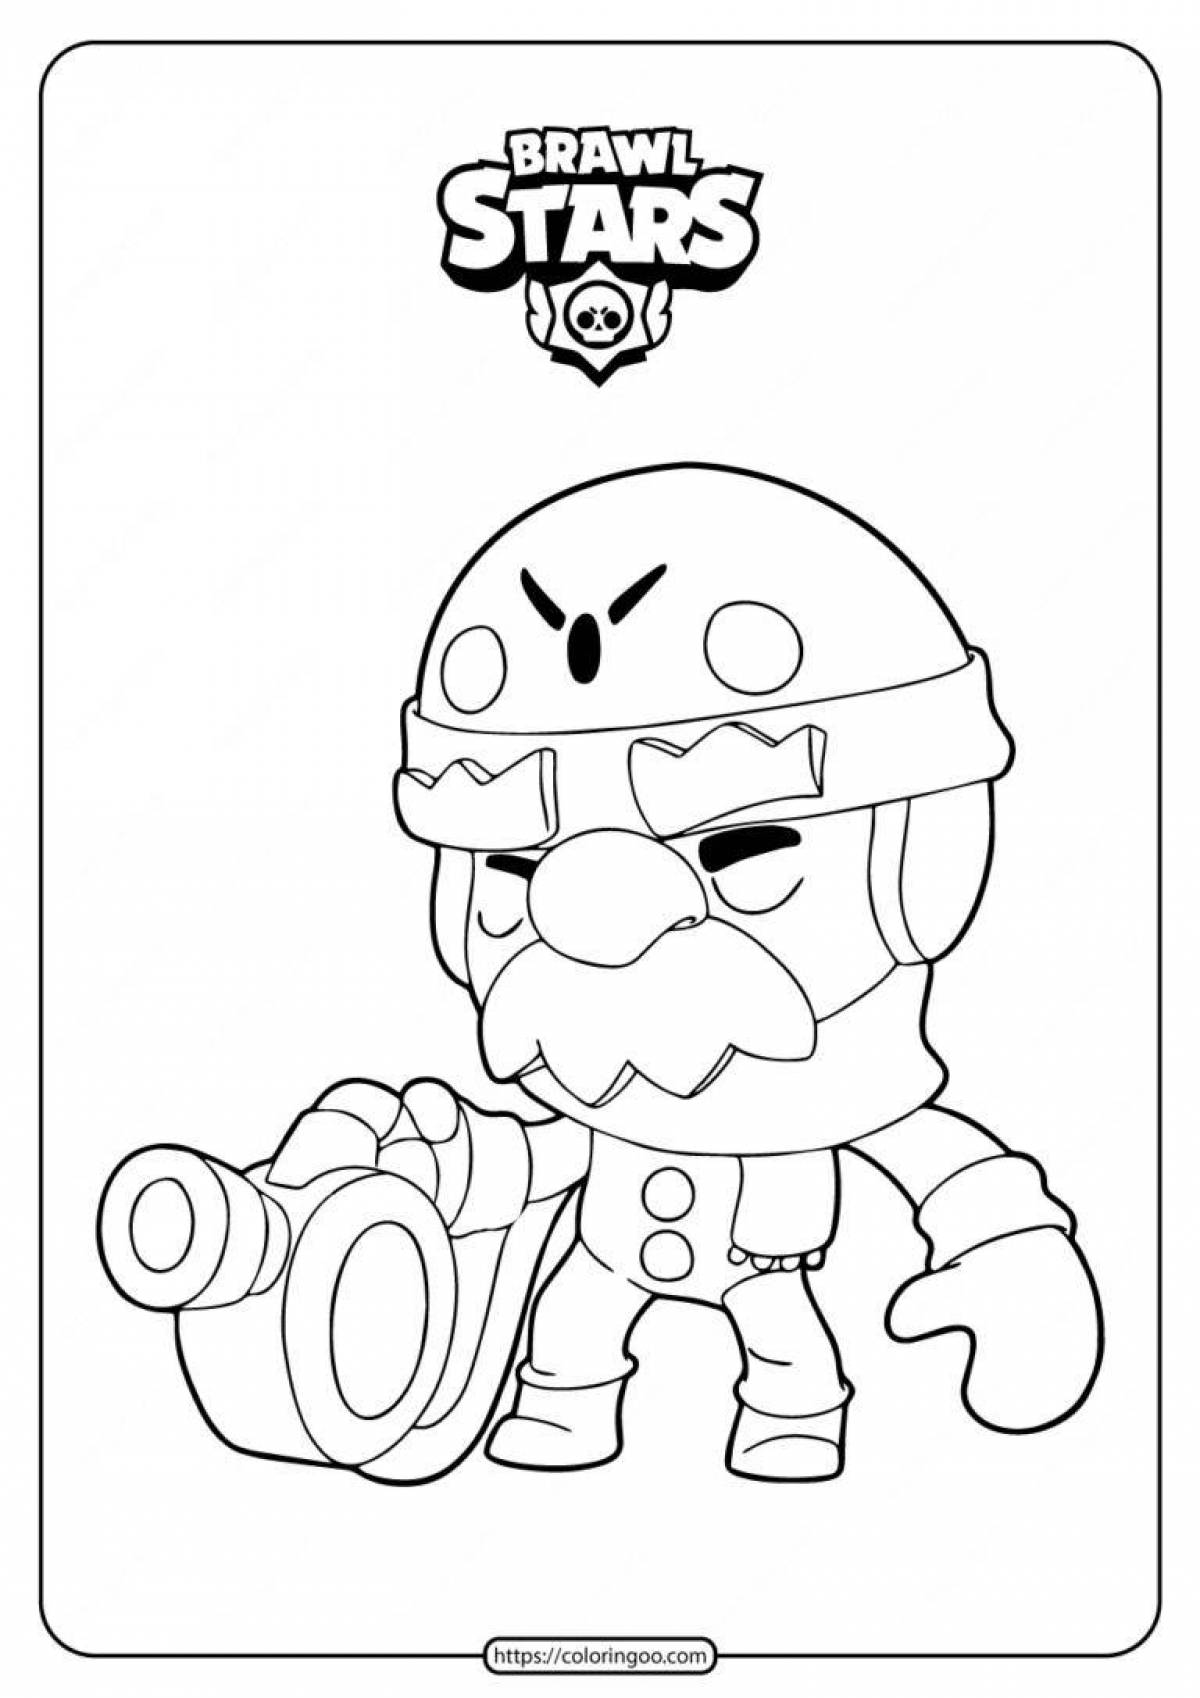 Drawing coloring pins from brawl stars